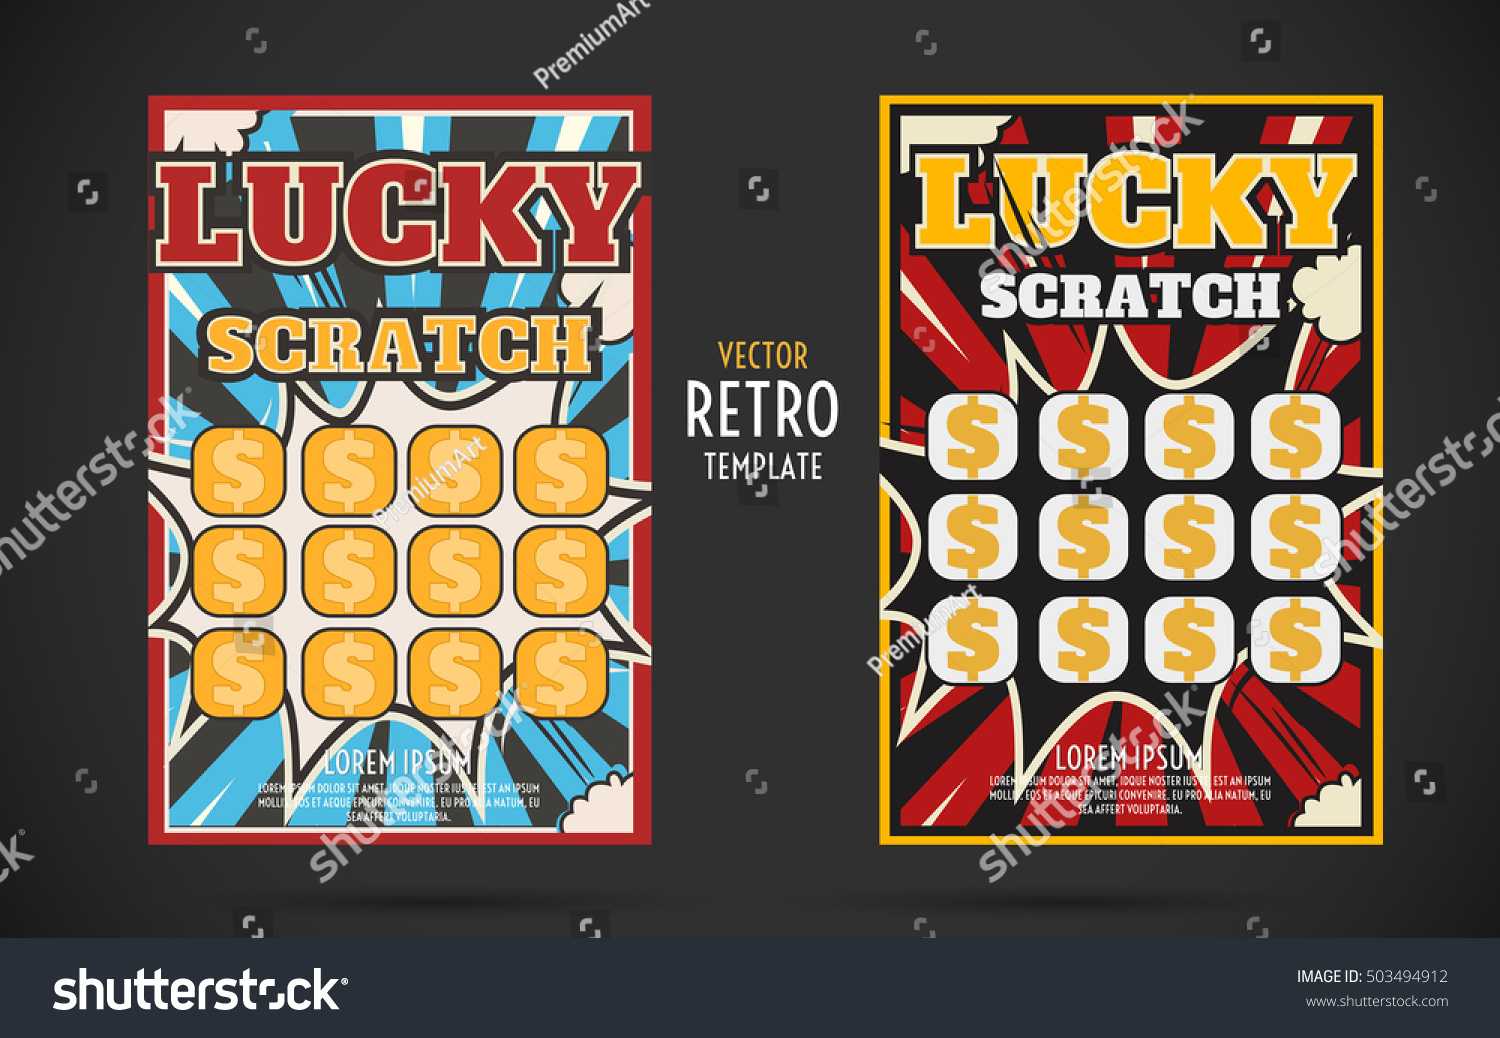 Scratch Off Lottery Card Retro Ticket Stock Image | Download Now Intended For Scratch Off Card Templates